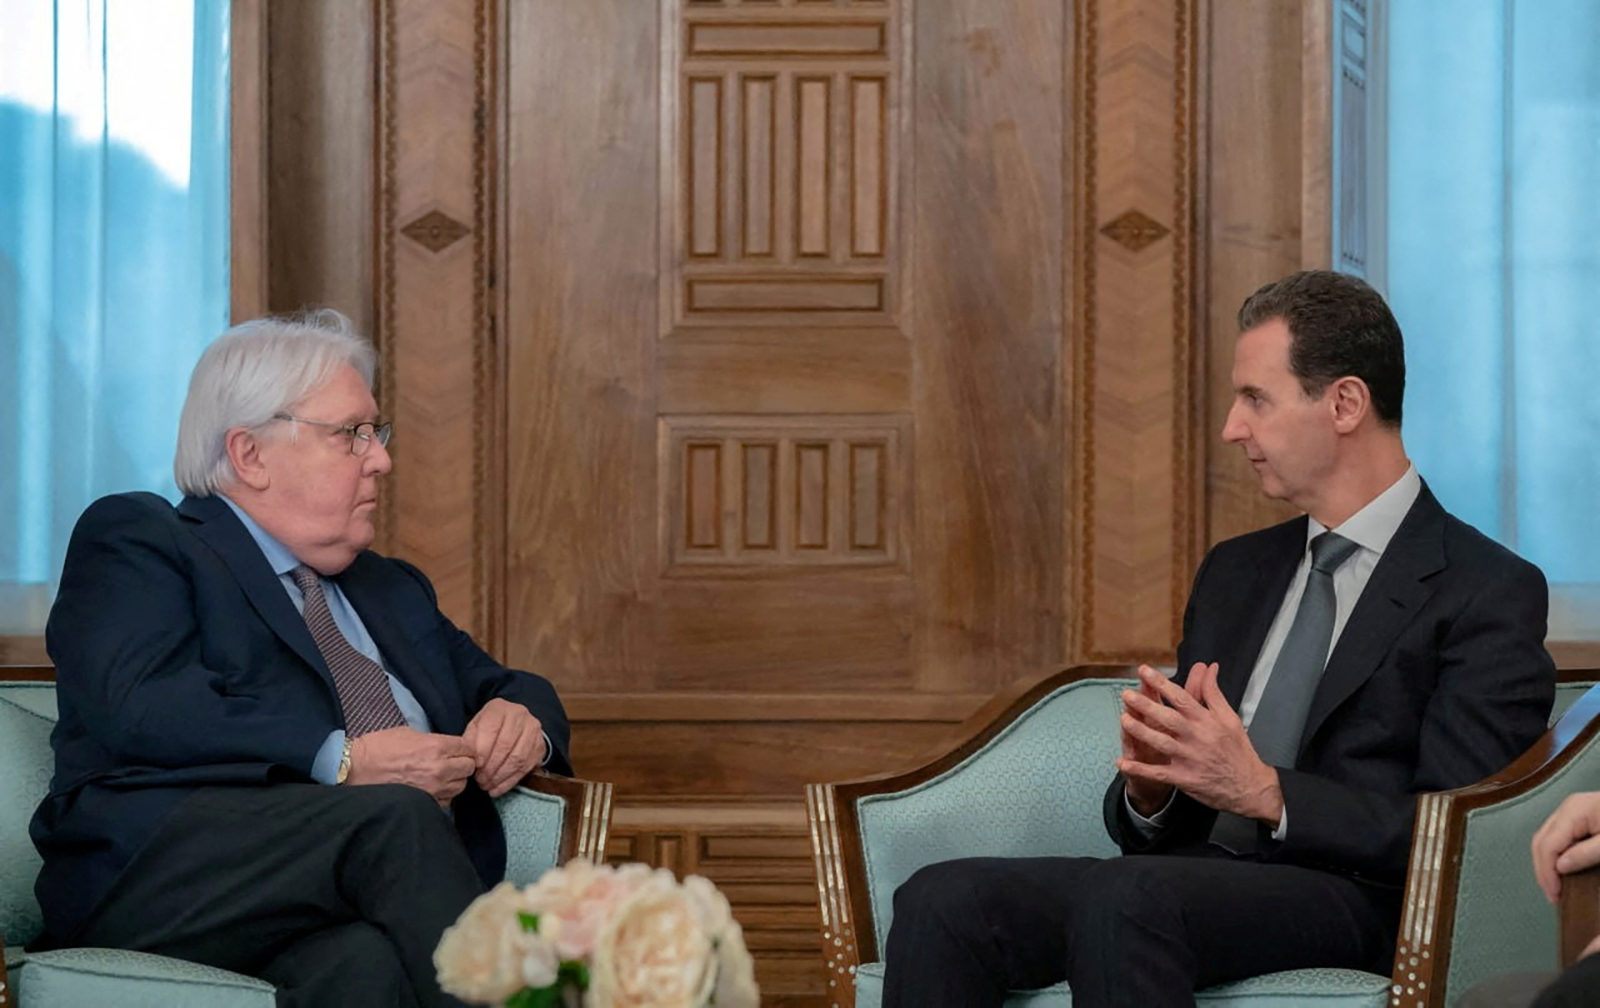 Syria's President Bashar al-Assad (right) met with United Nations Under-Secretary-General for Humanitarian Affairs and Emergency Relief Coordinator Martin Griffiths today in Damascus, Syria.